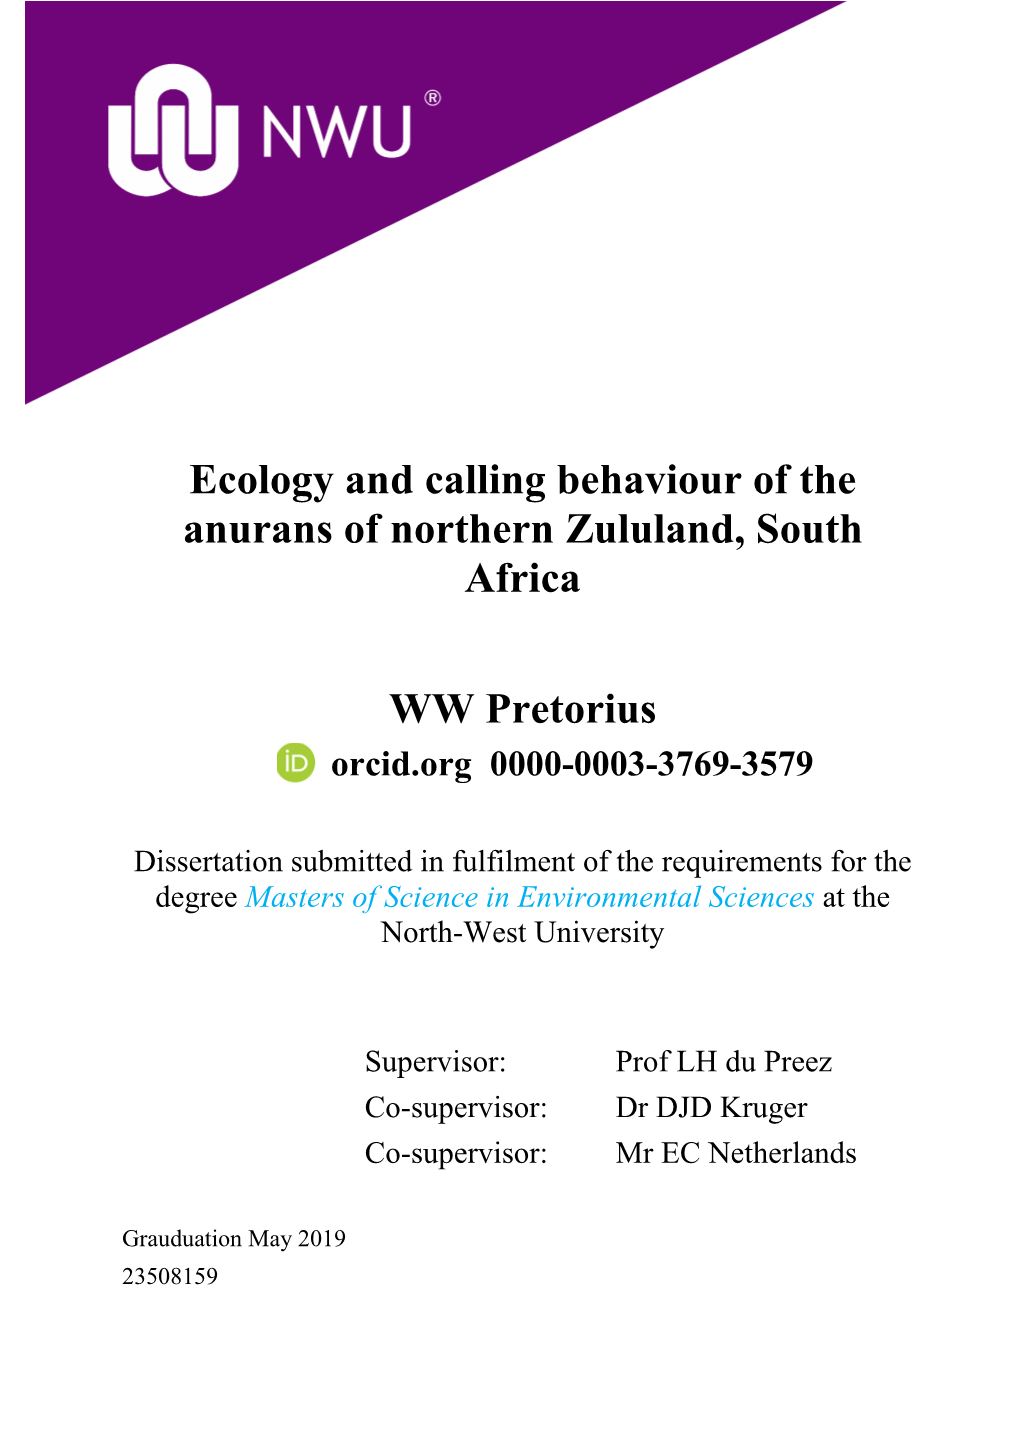 Ecology and Calling Behaviour of the Anurans of Northern Zululand, South Africa